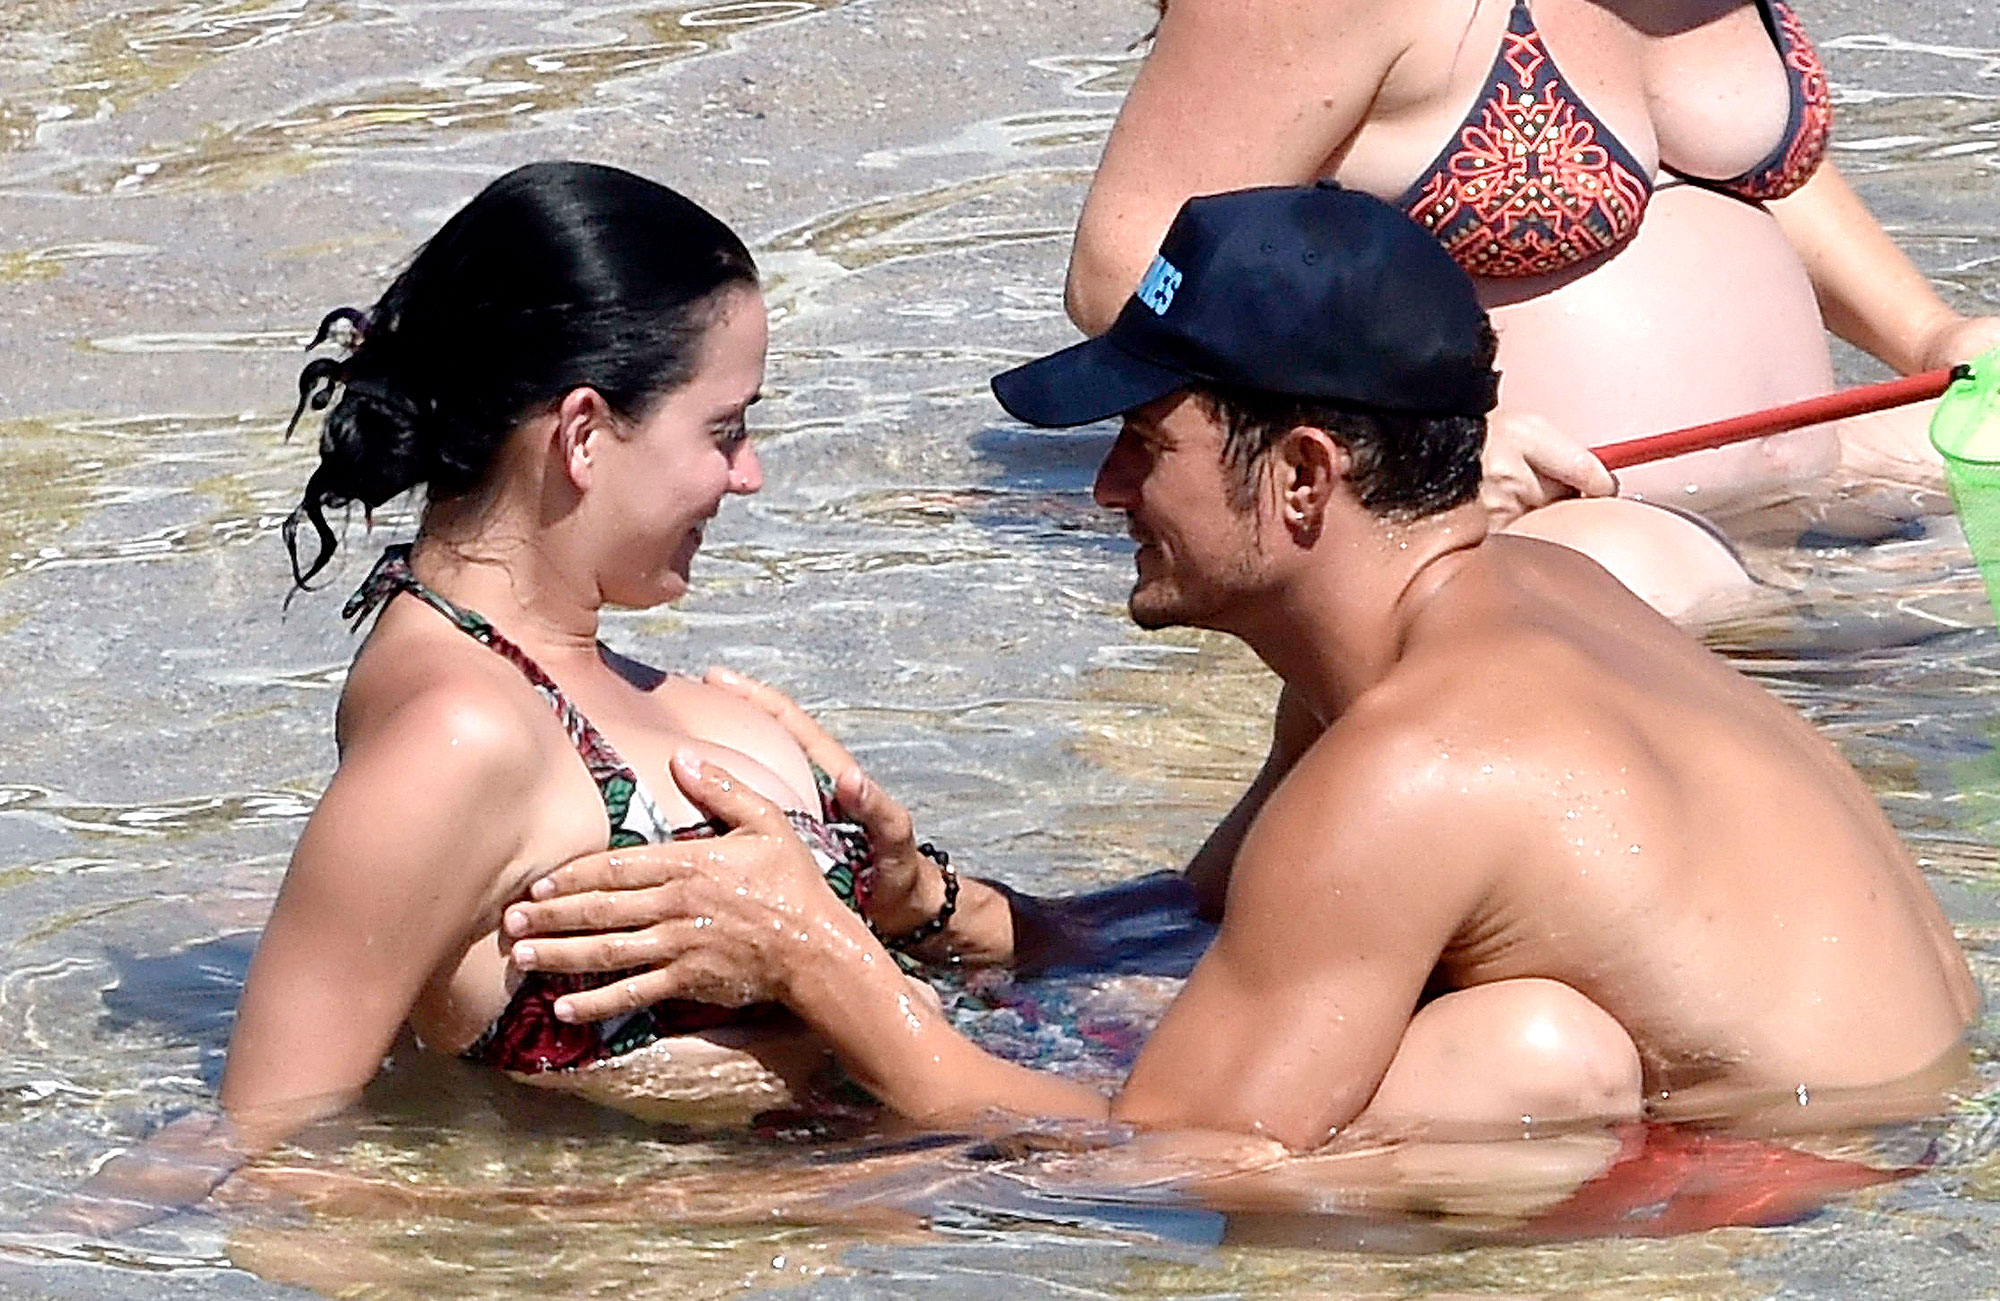 Perfect Beach Tits - Orlando Bloom Grabs Katy Perry's Boobs During Beach Vacation